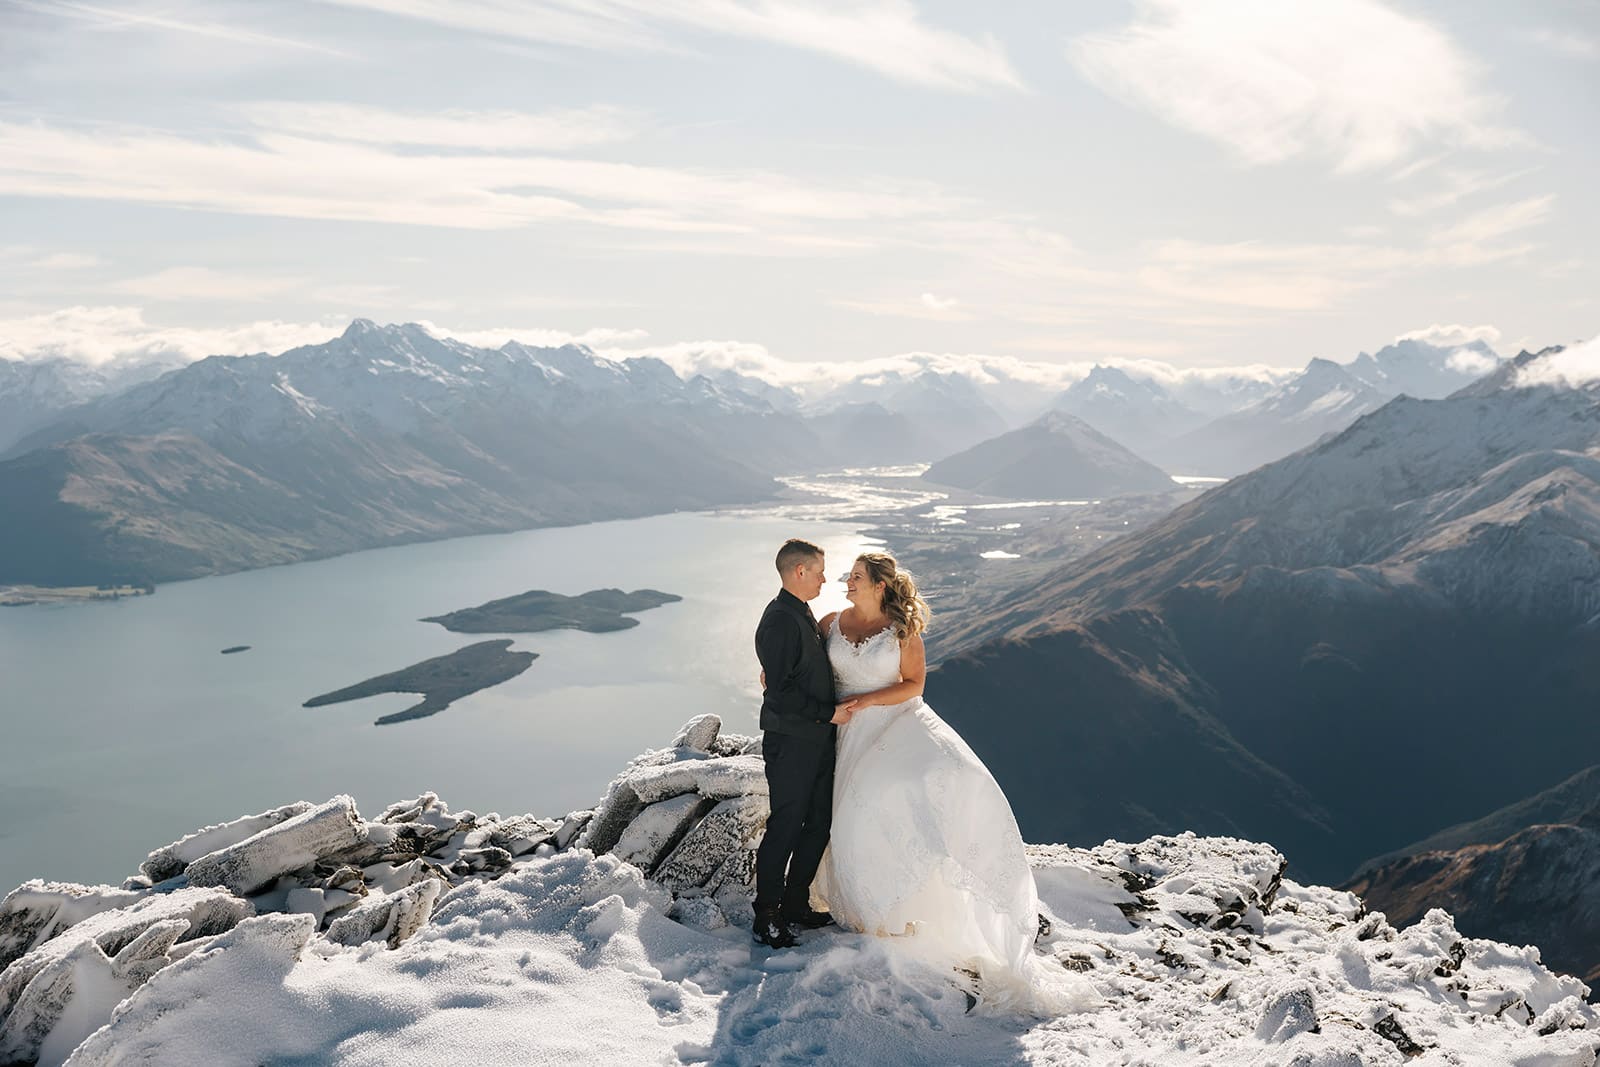 Heli Wedding photography in the snow on Mt Crichton Queenstown New Zealand